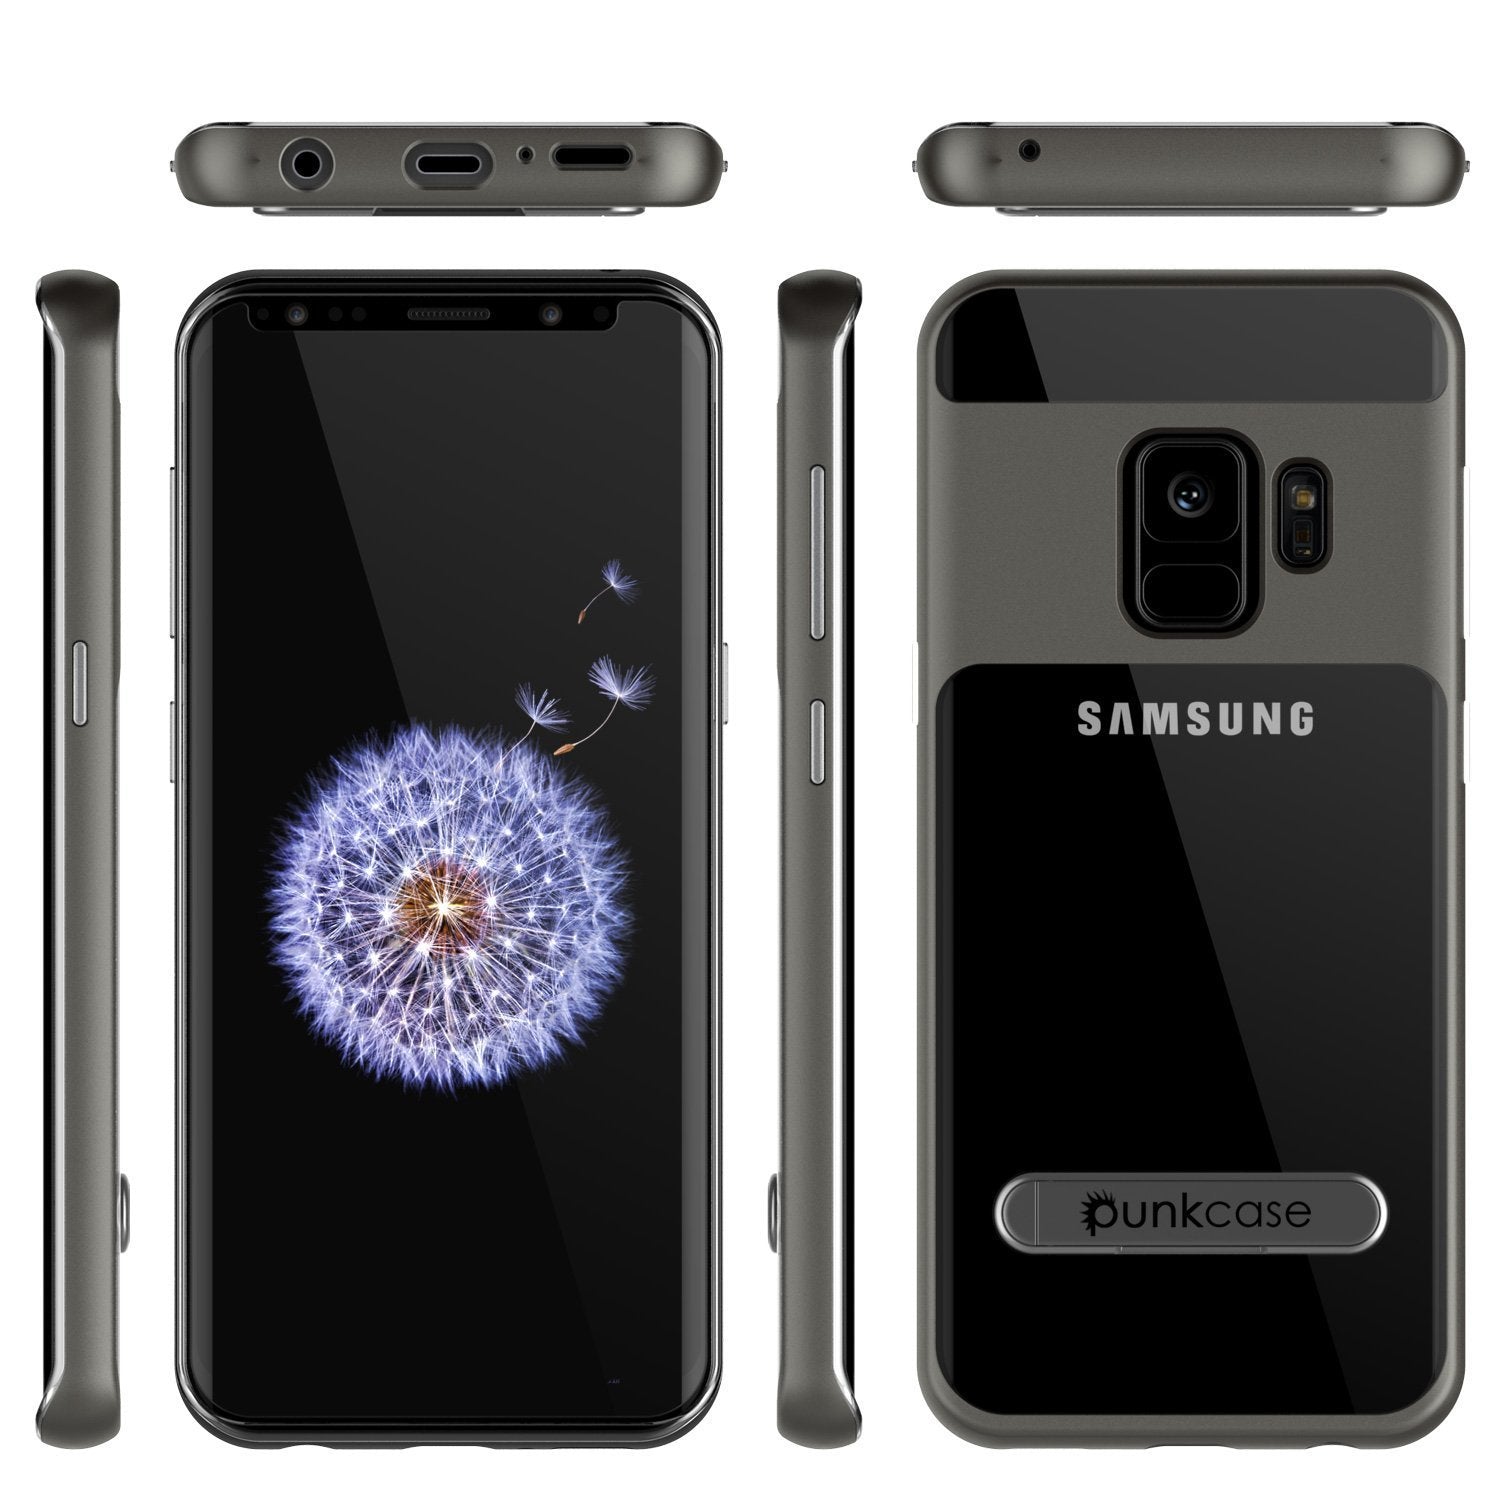 Galaxy S9 Punkcase, LUCID 3.0 Series Cover w/Kickstand, [Grey]